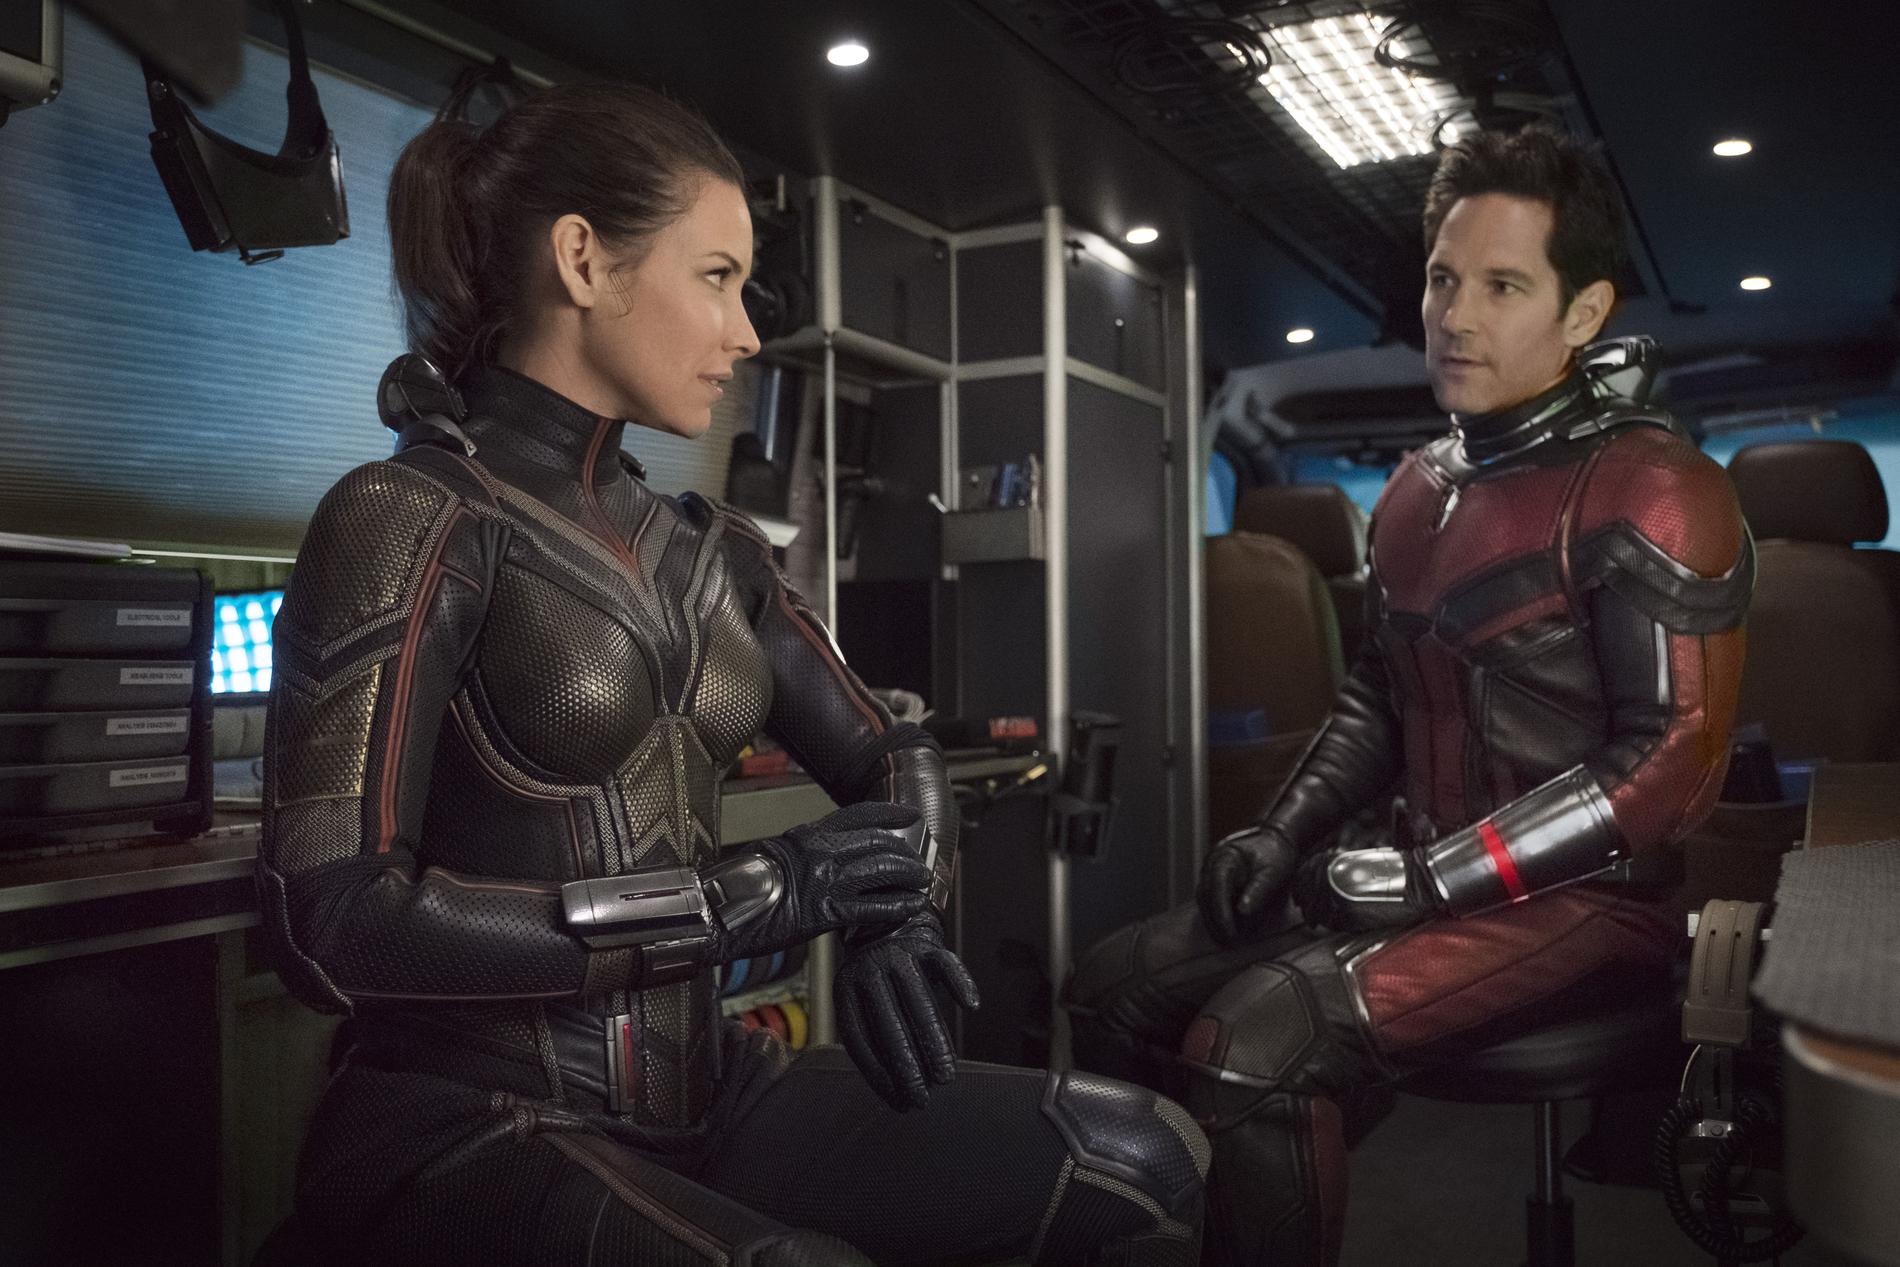 ”Ant-man and the wasp”.